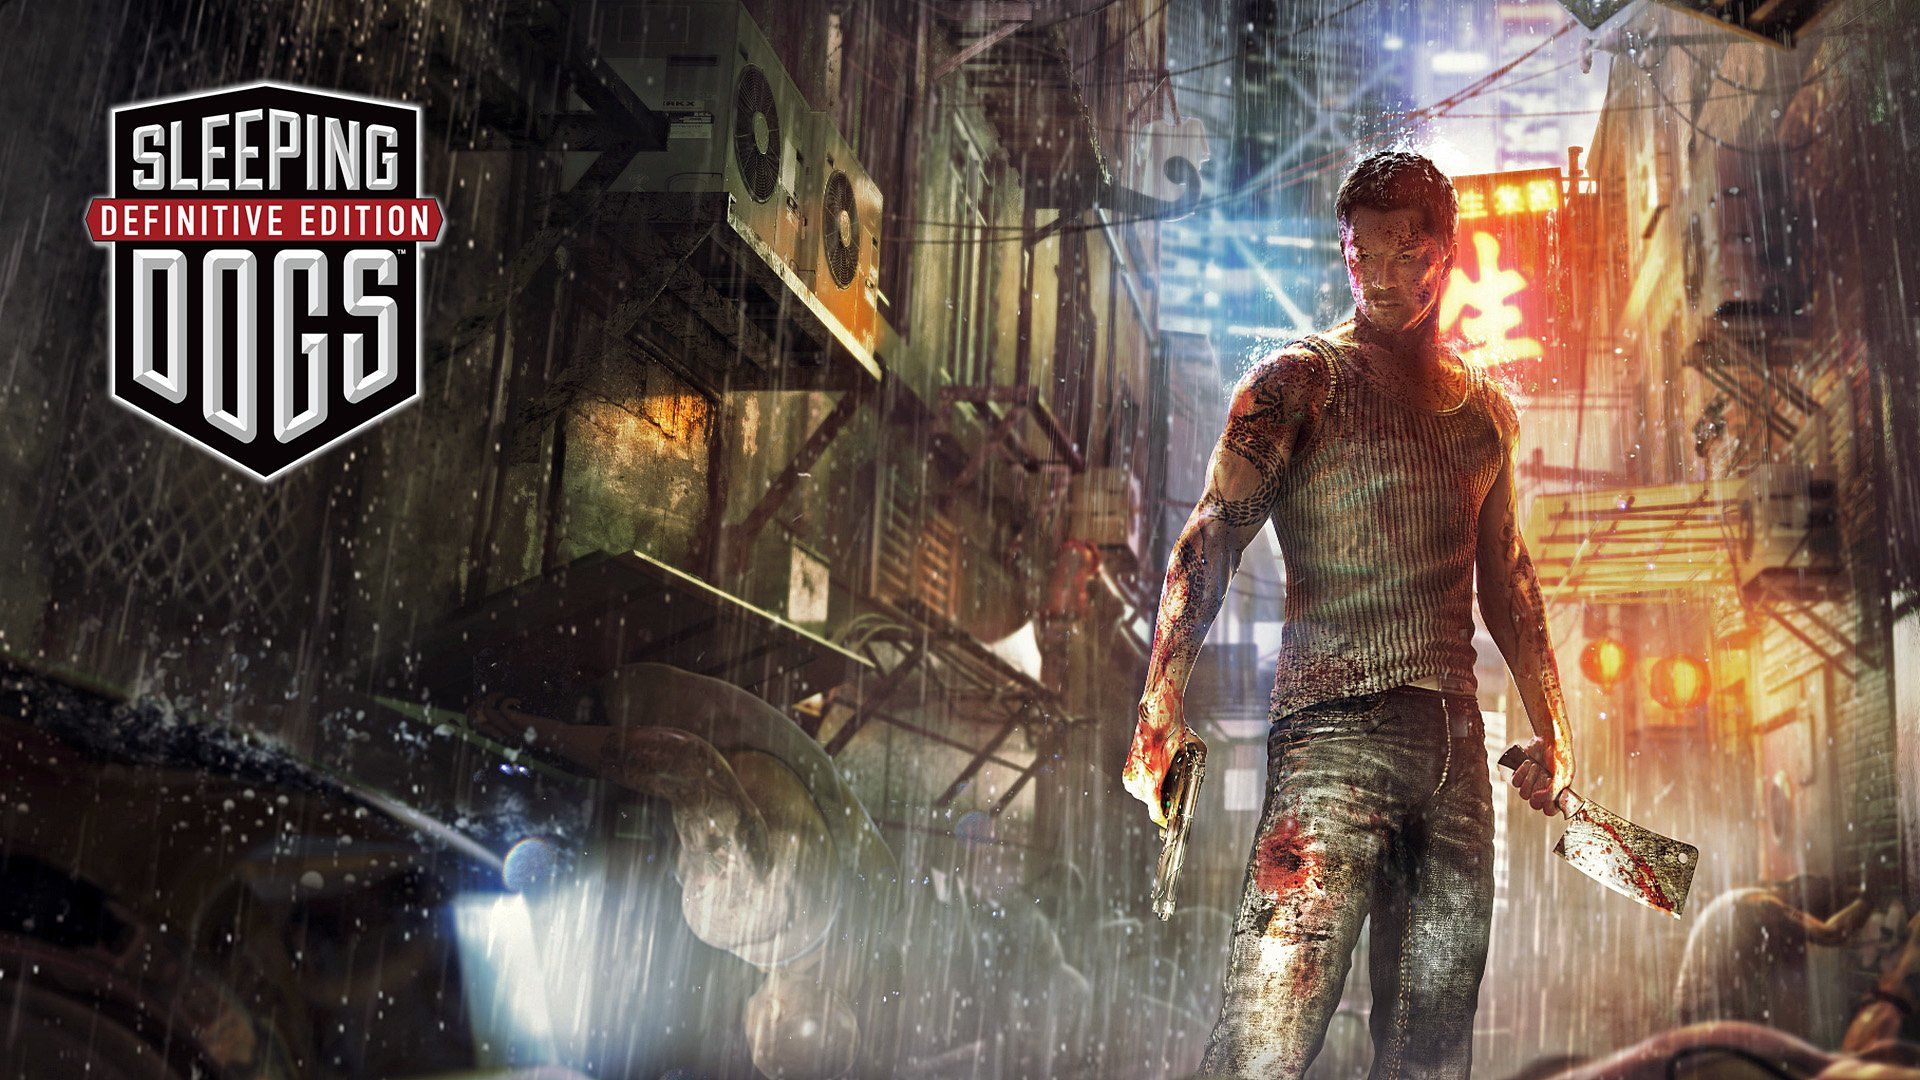 Android Sleeping Dogs Wallpapers